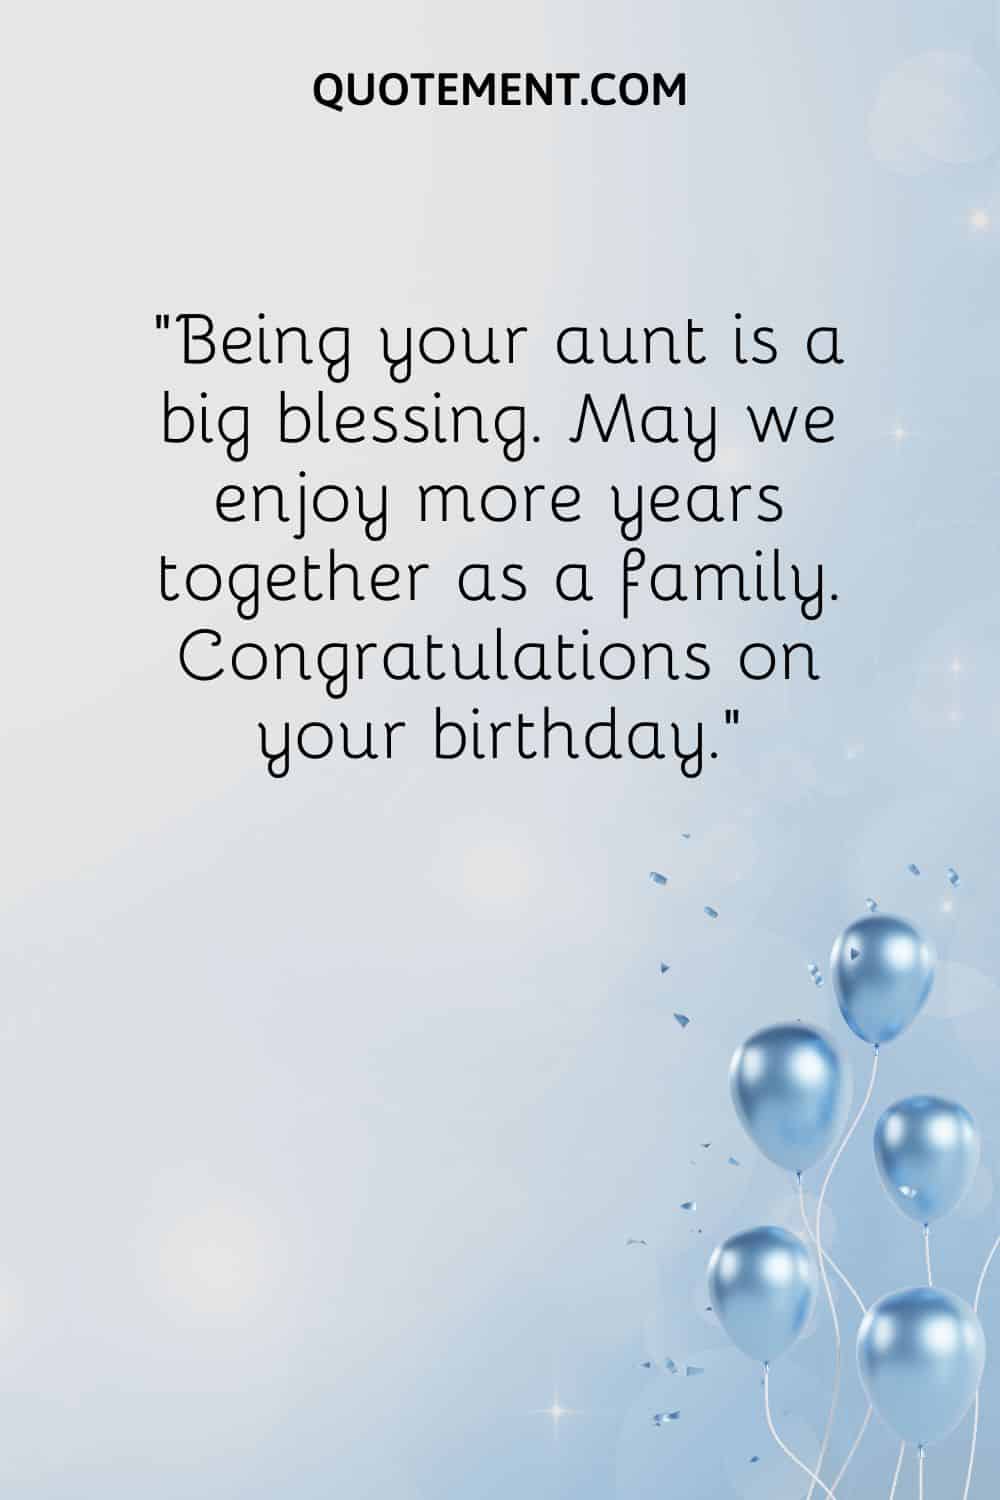 “Being your aunt is a big blessing. May we enjoy more years together as a family. Congratulations on your birthday.”